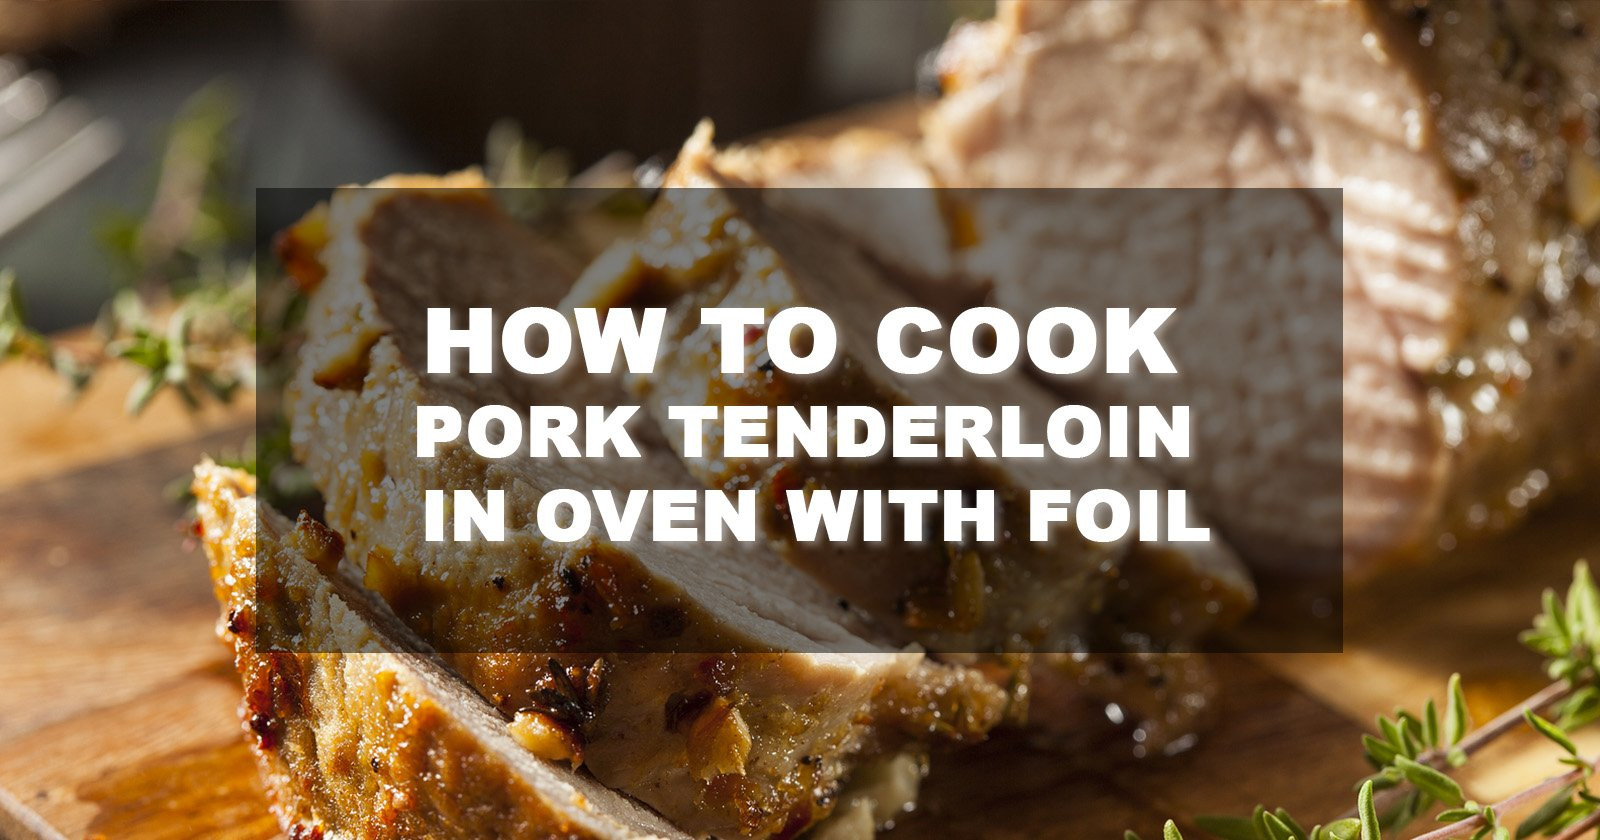 How To Cook Pork Tenderloin In Oven With Foil
 How To Cook Pork Tenderloin In Oven With Foil FamilyNano